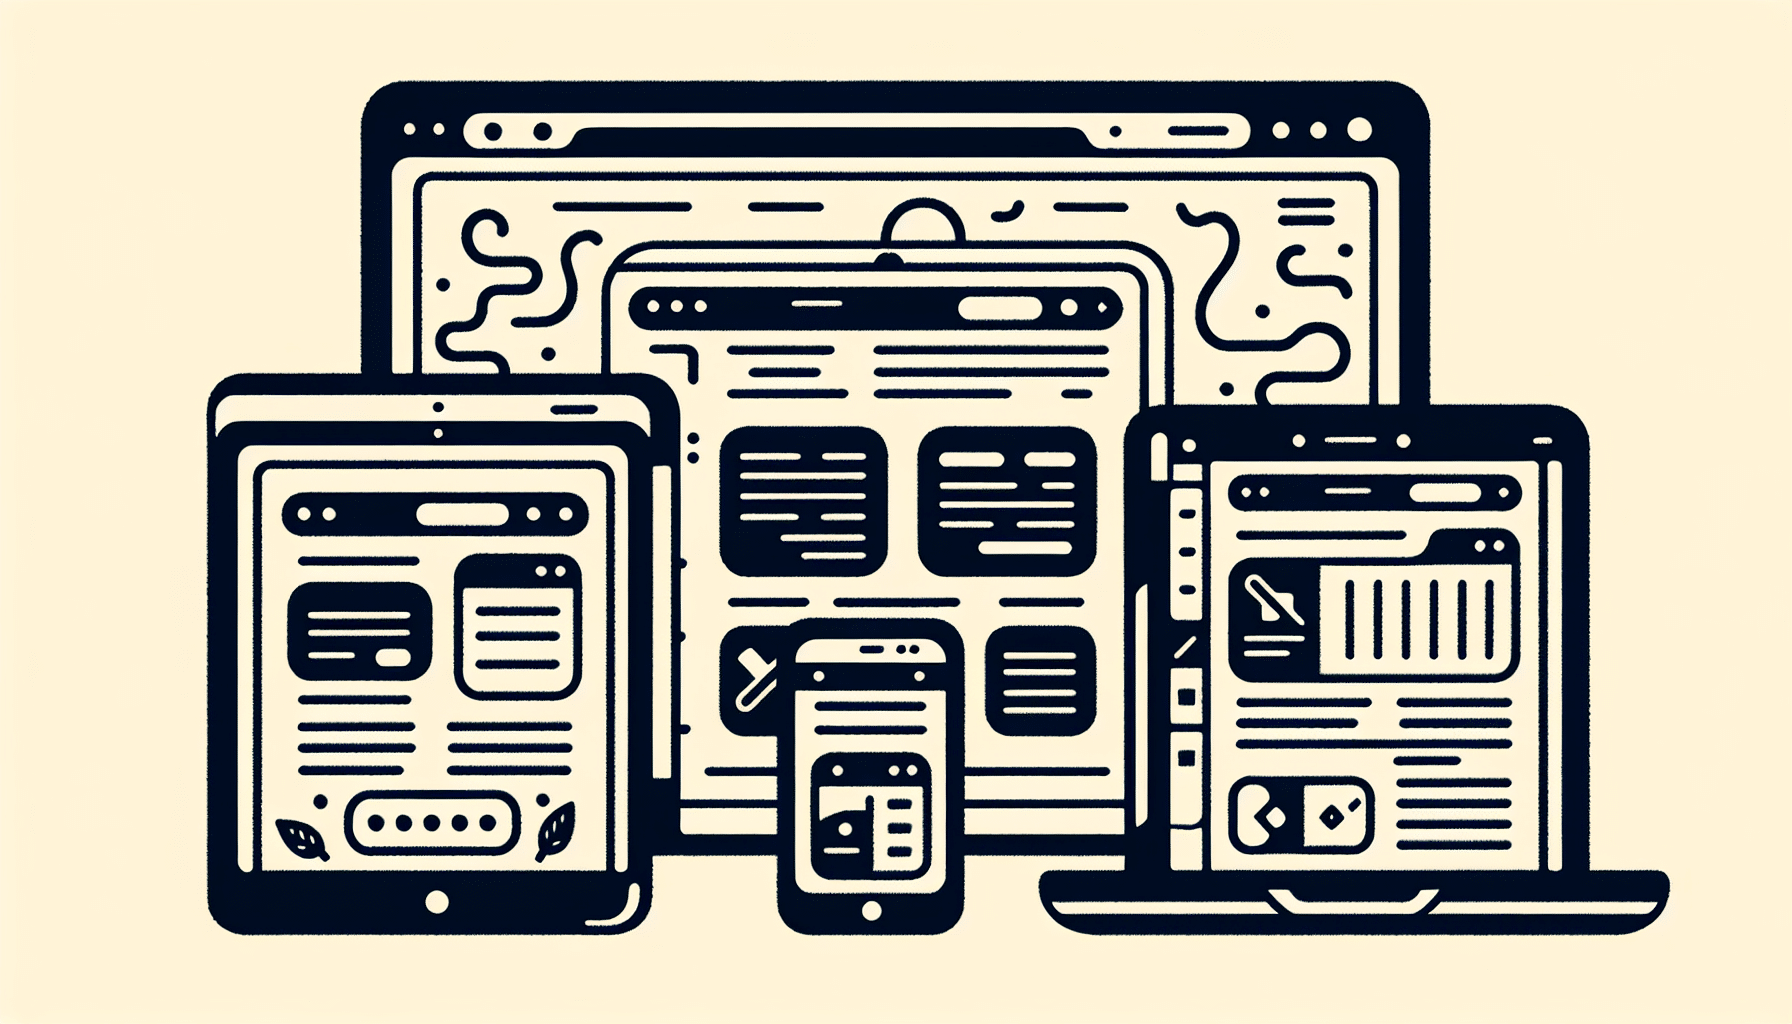 Media queries for refined control in responsive design